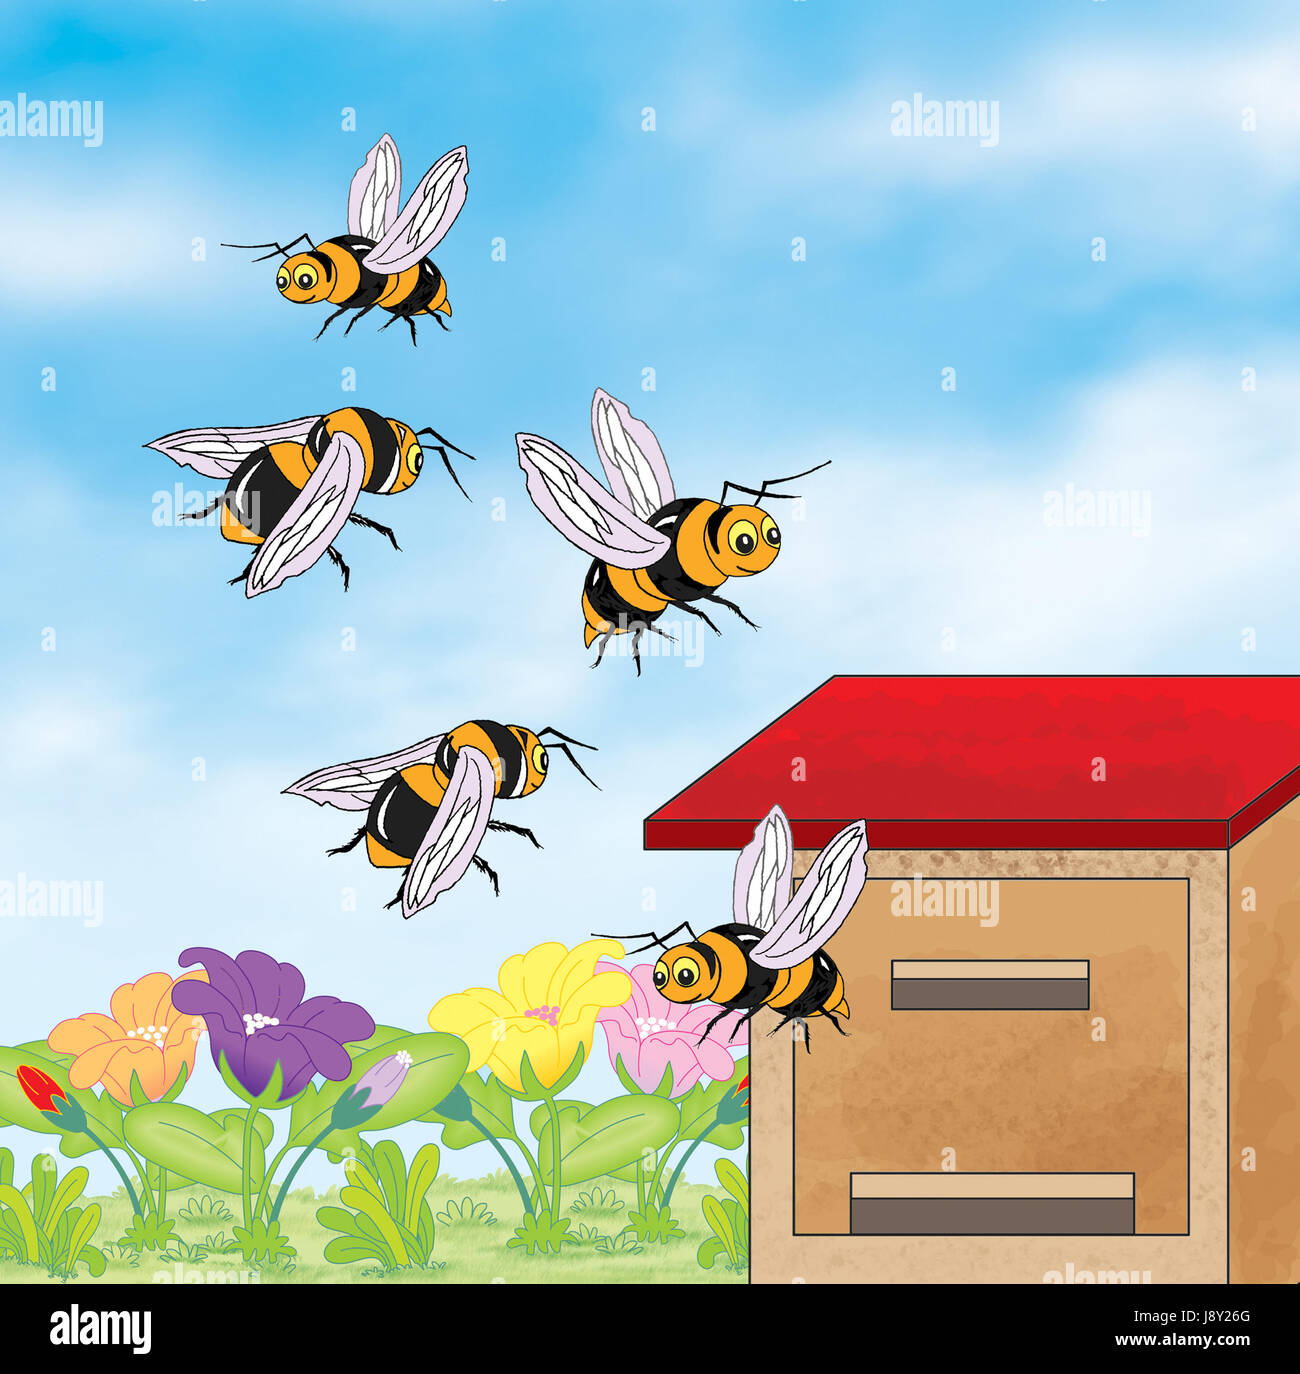 Bees flying around the beehive - illustration Stock Photo